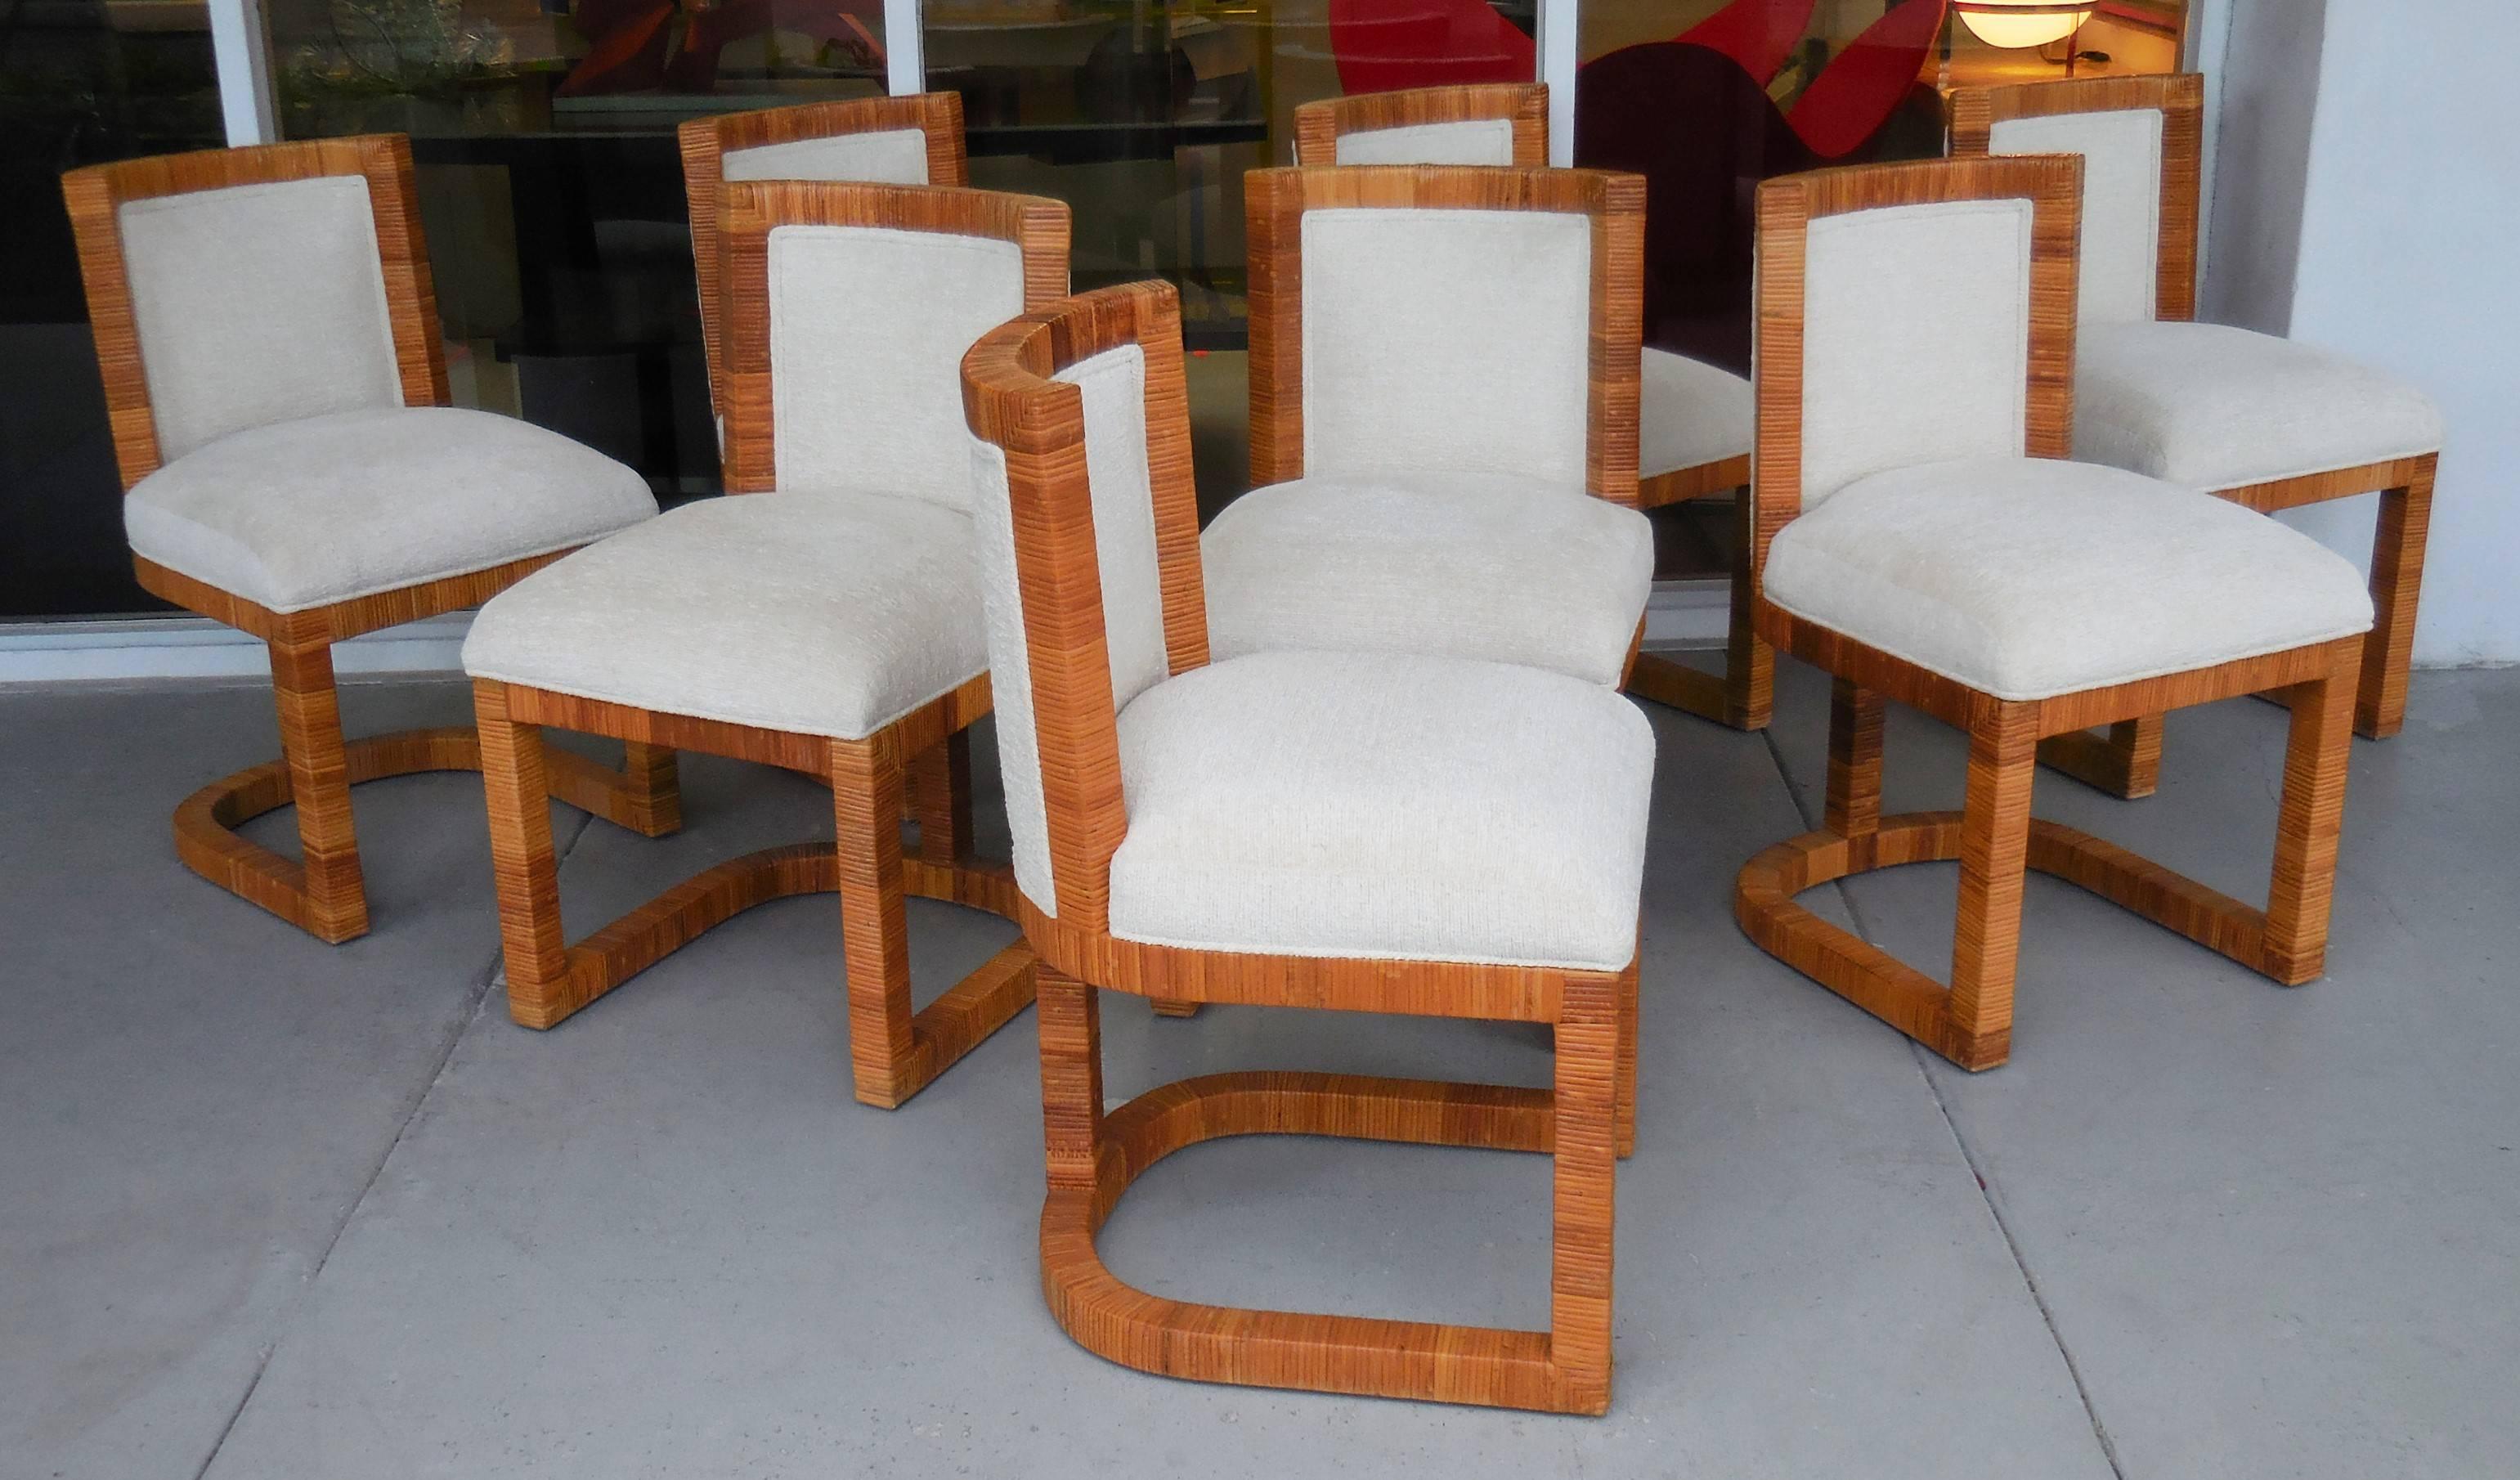 Stunning set of eight chairs. Casual elegance at it's best. Clean modern design, the wood frames are meticulously wrapped in rattan cane. Great looking from any angle. 
Casual elegance at it's best.